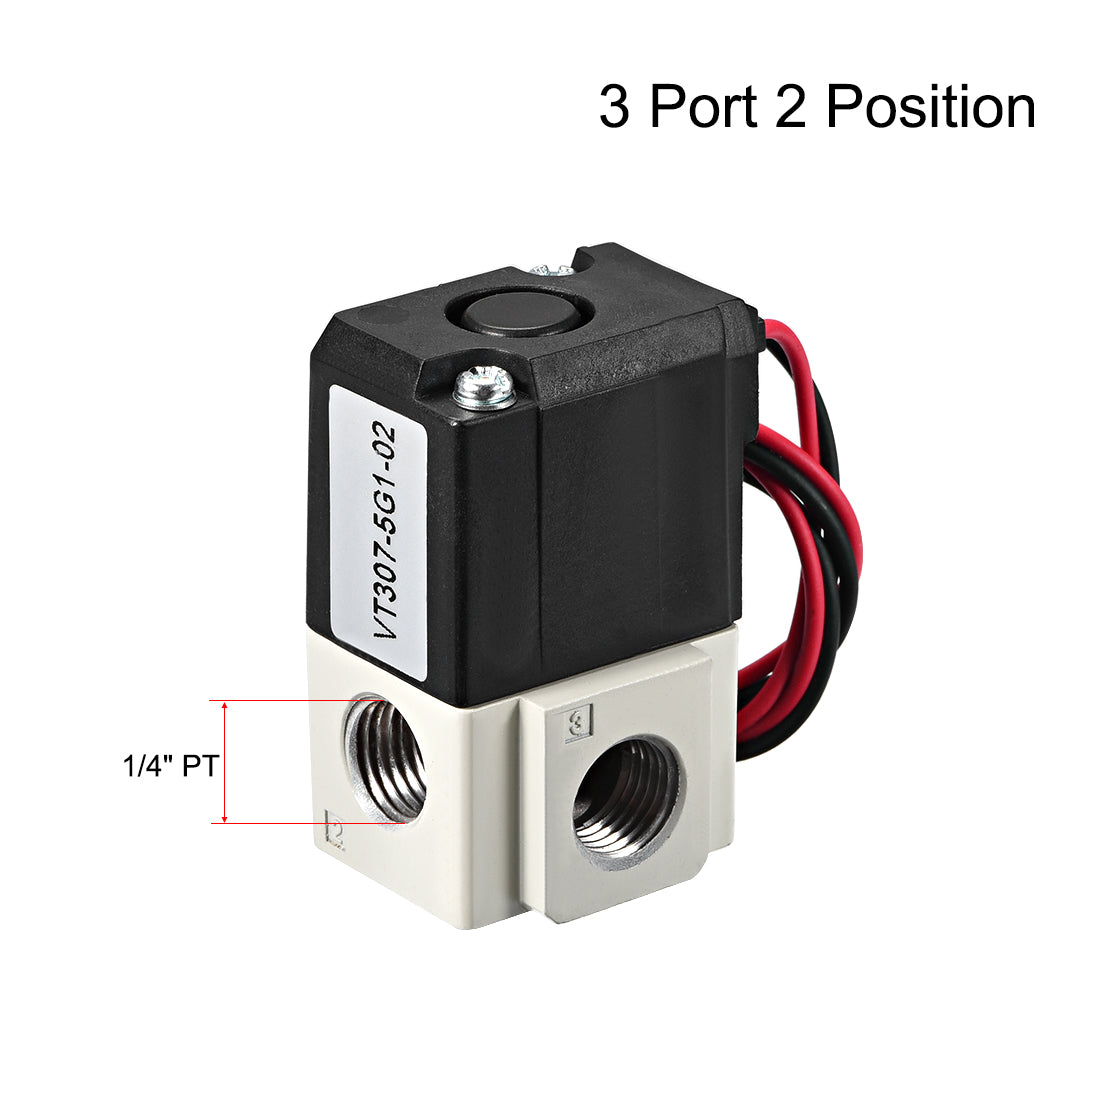 uxcell Uxcell QVT307 Pneumatic Air NC Single Electrical Control Solenoid Valve DC24V 3 Way 2 Position 1/4" PT Internally Piloted Acting Type